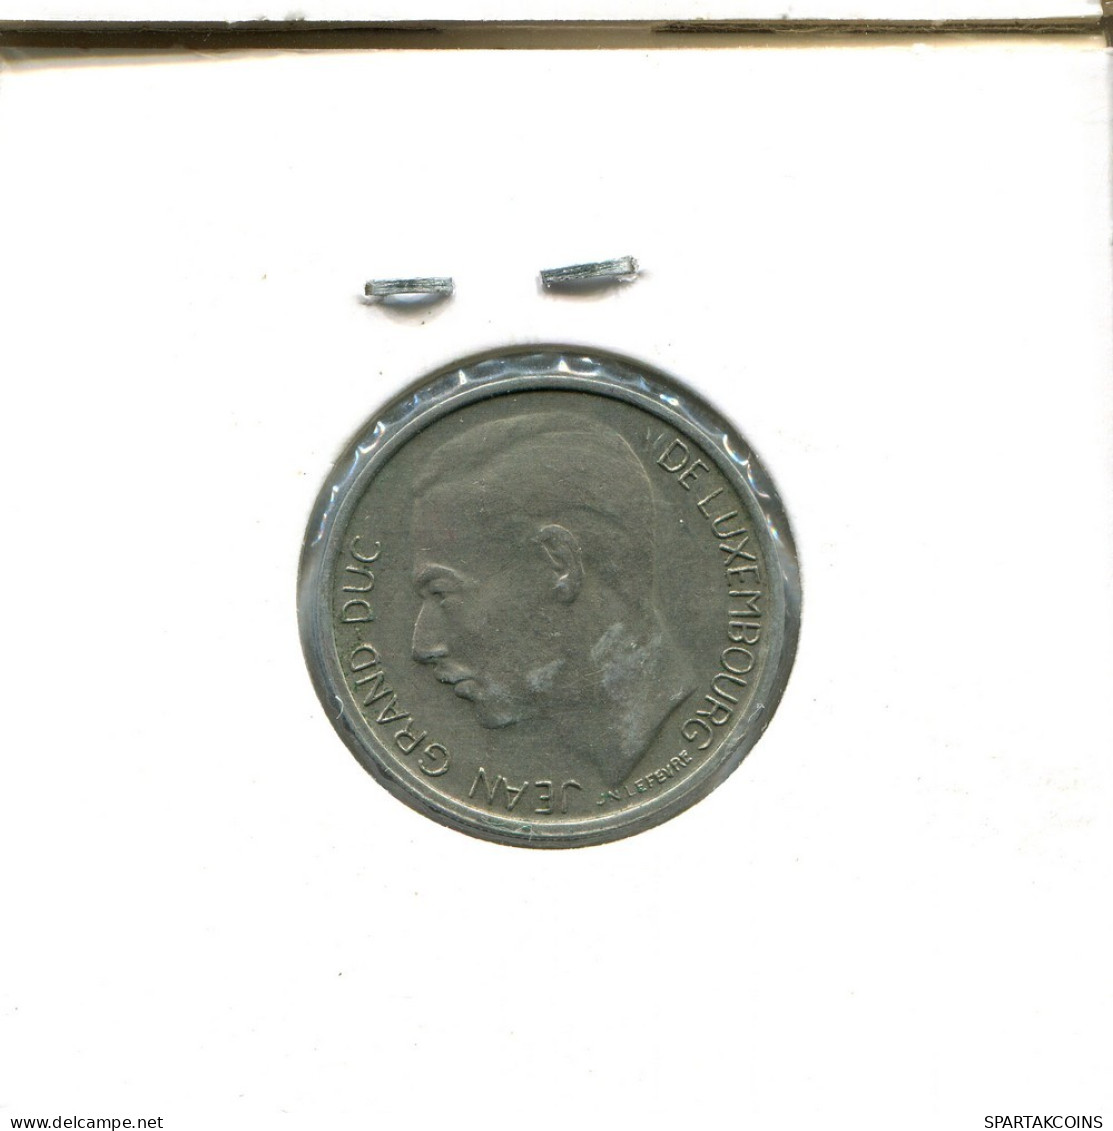 1 FRANC 1966 LUXEMBURG LUXEMBOURG Münze #AT207.D.A - Luxemburgo